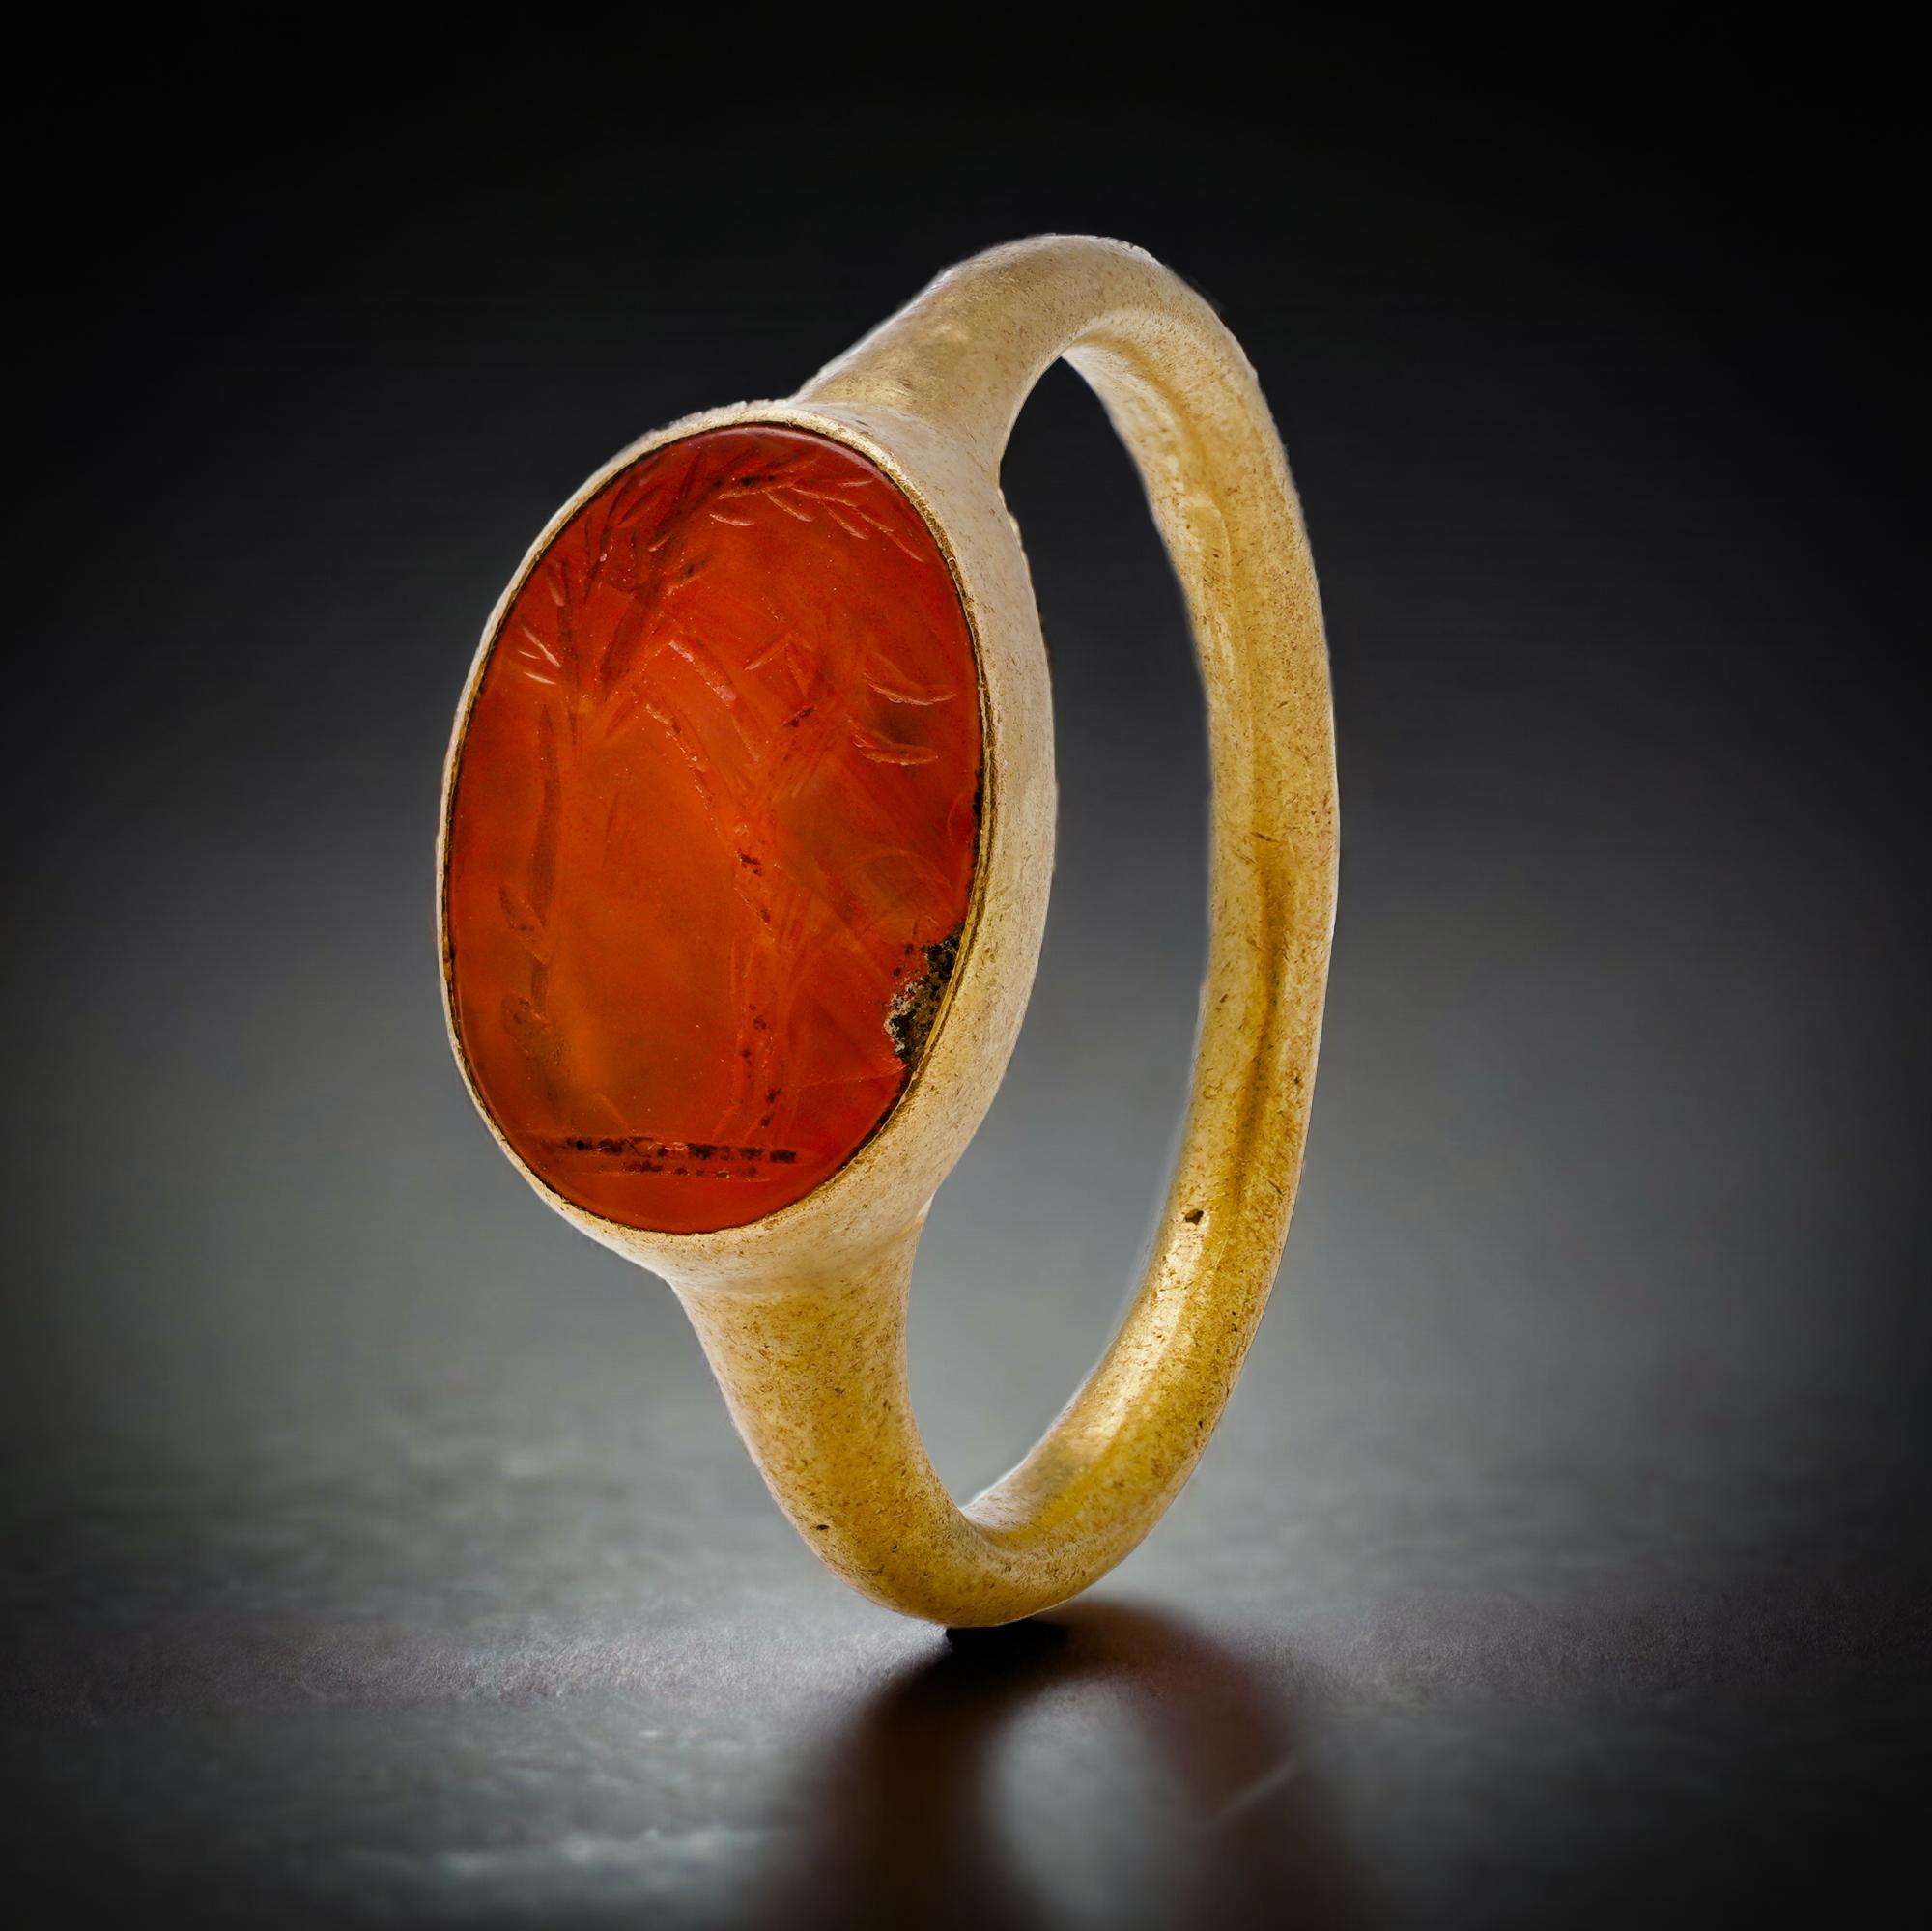 Roman 22kt. gold ring with goat carnelian intaglio.
Circa 100 - 300 AD. 

A lovely carnelian stone intaglio engraved with a goat rearing up a palm tree, set in a gold ring of a thin hoop, slightly expanding to support the bezel.

X - Ray tested